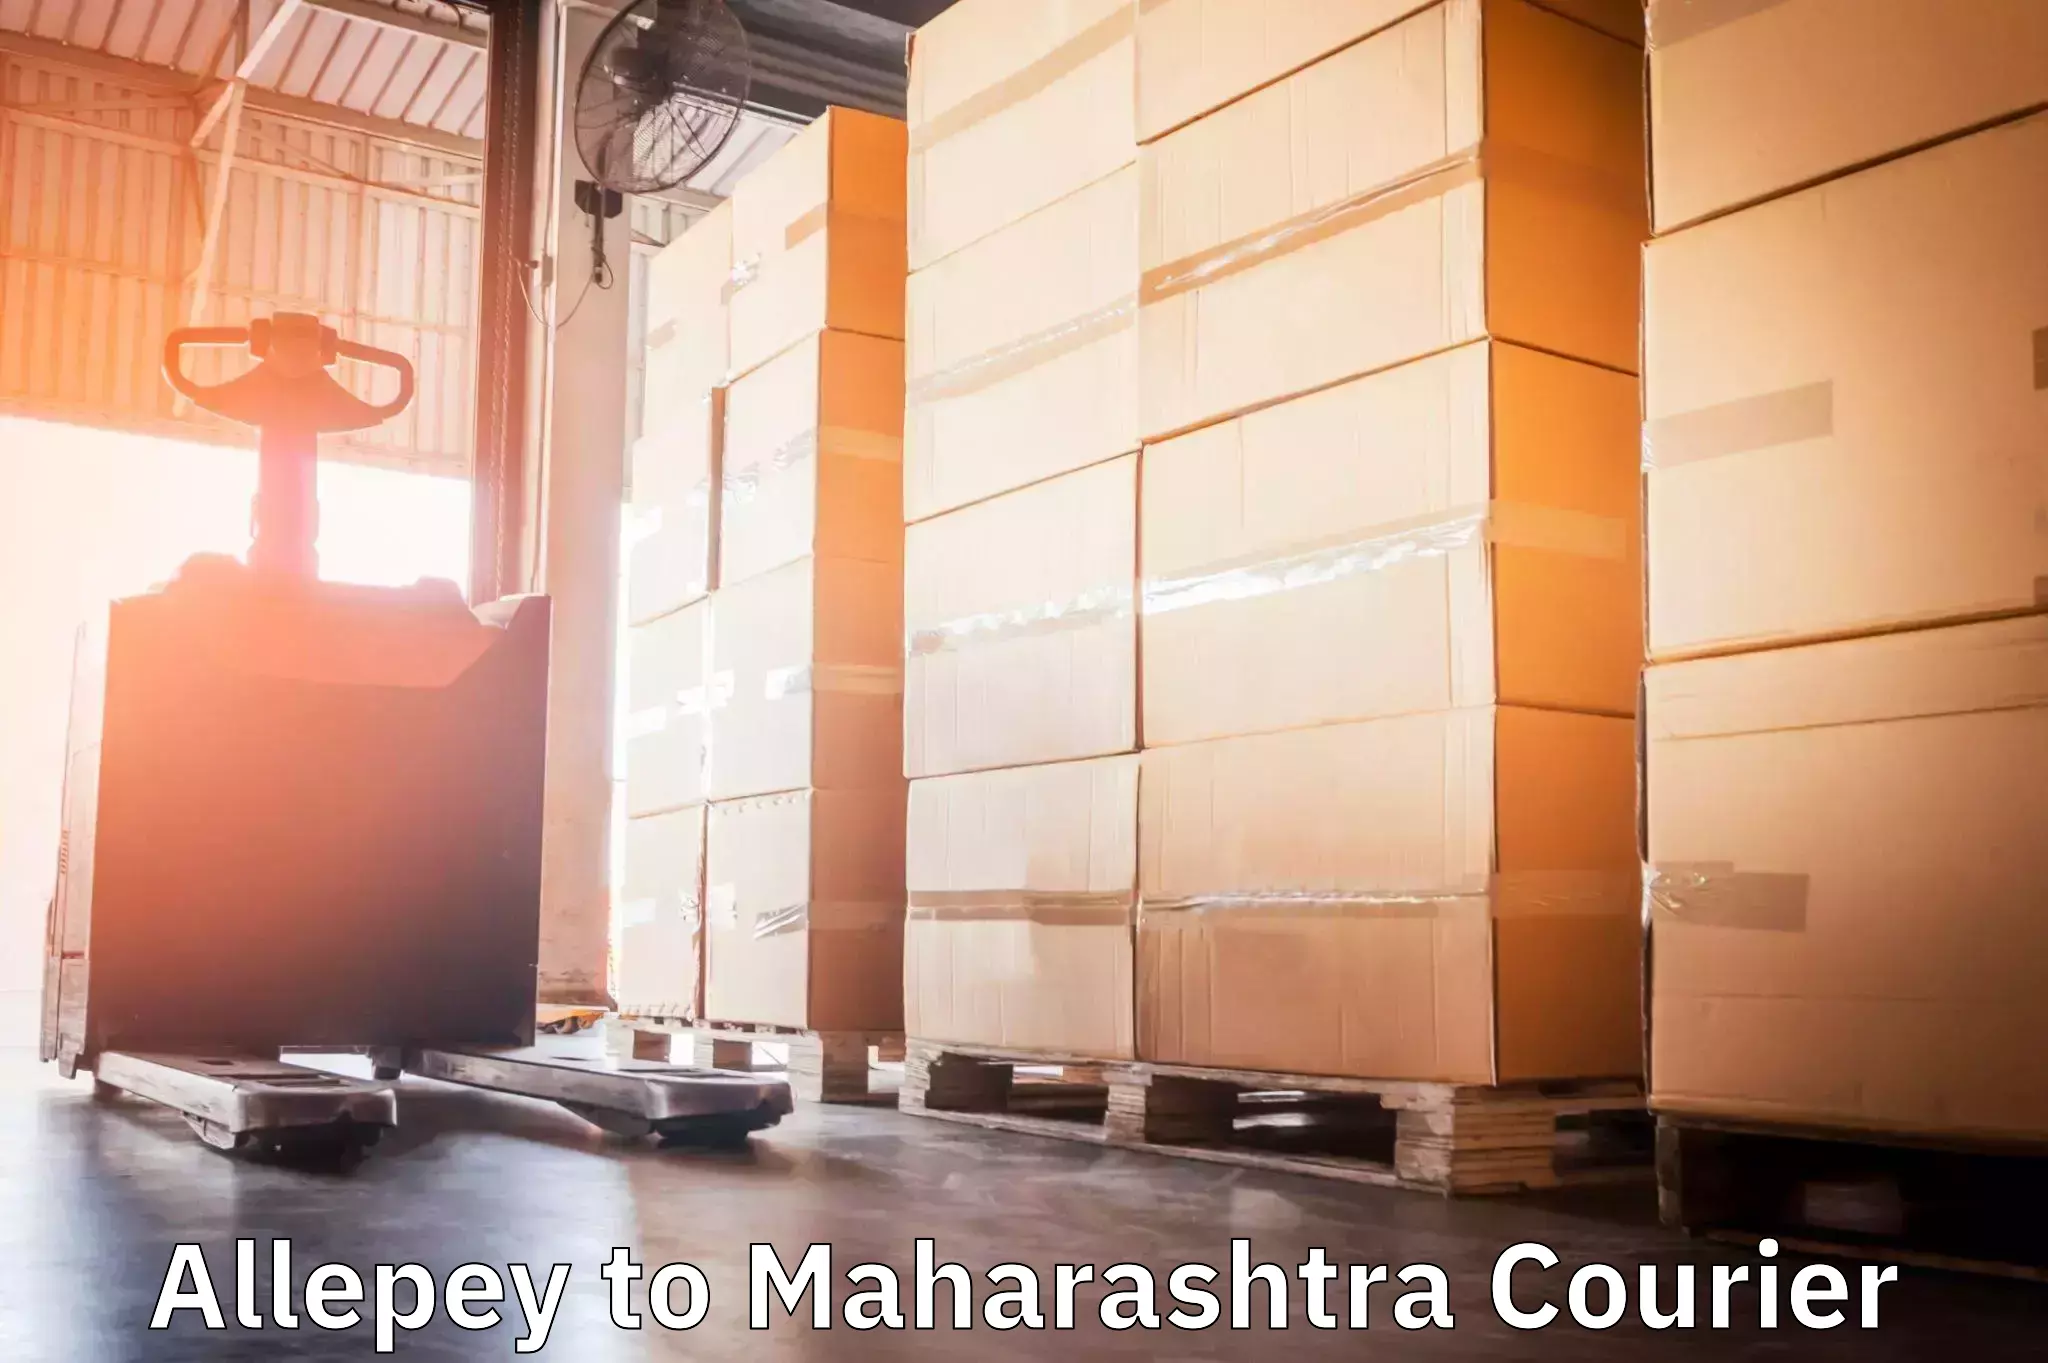 Multi-national courier services Allepey to Maharashtra